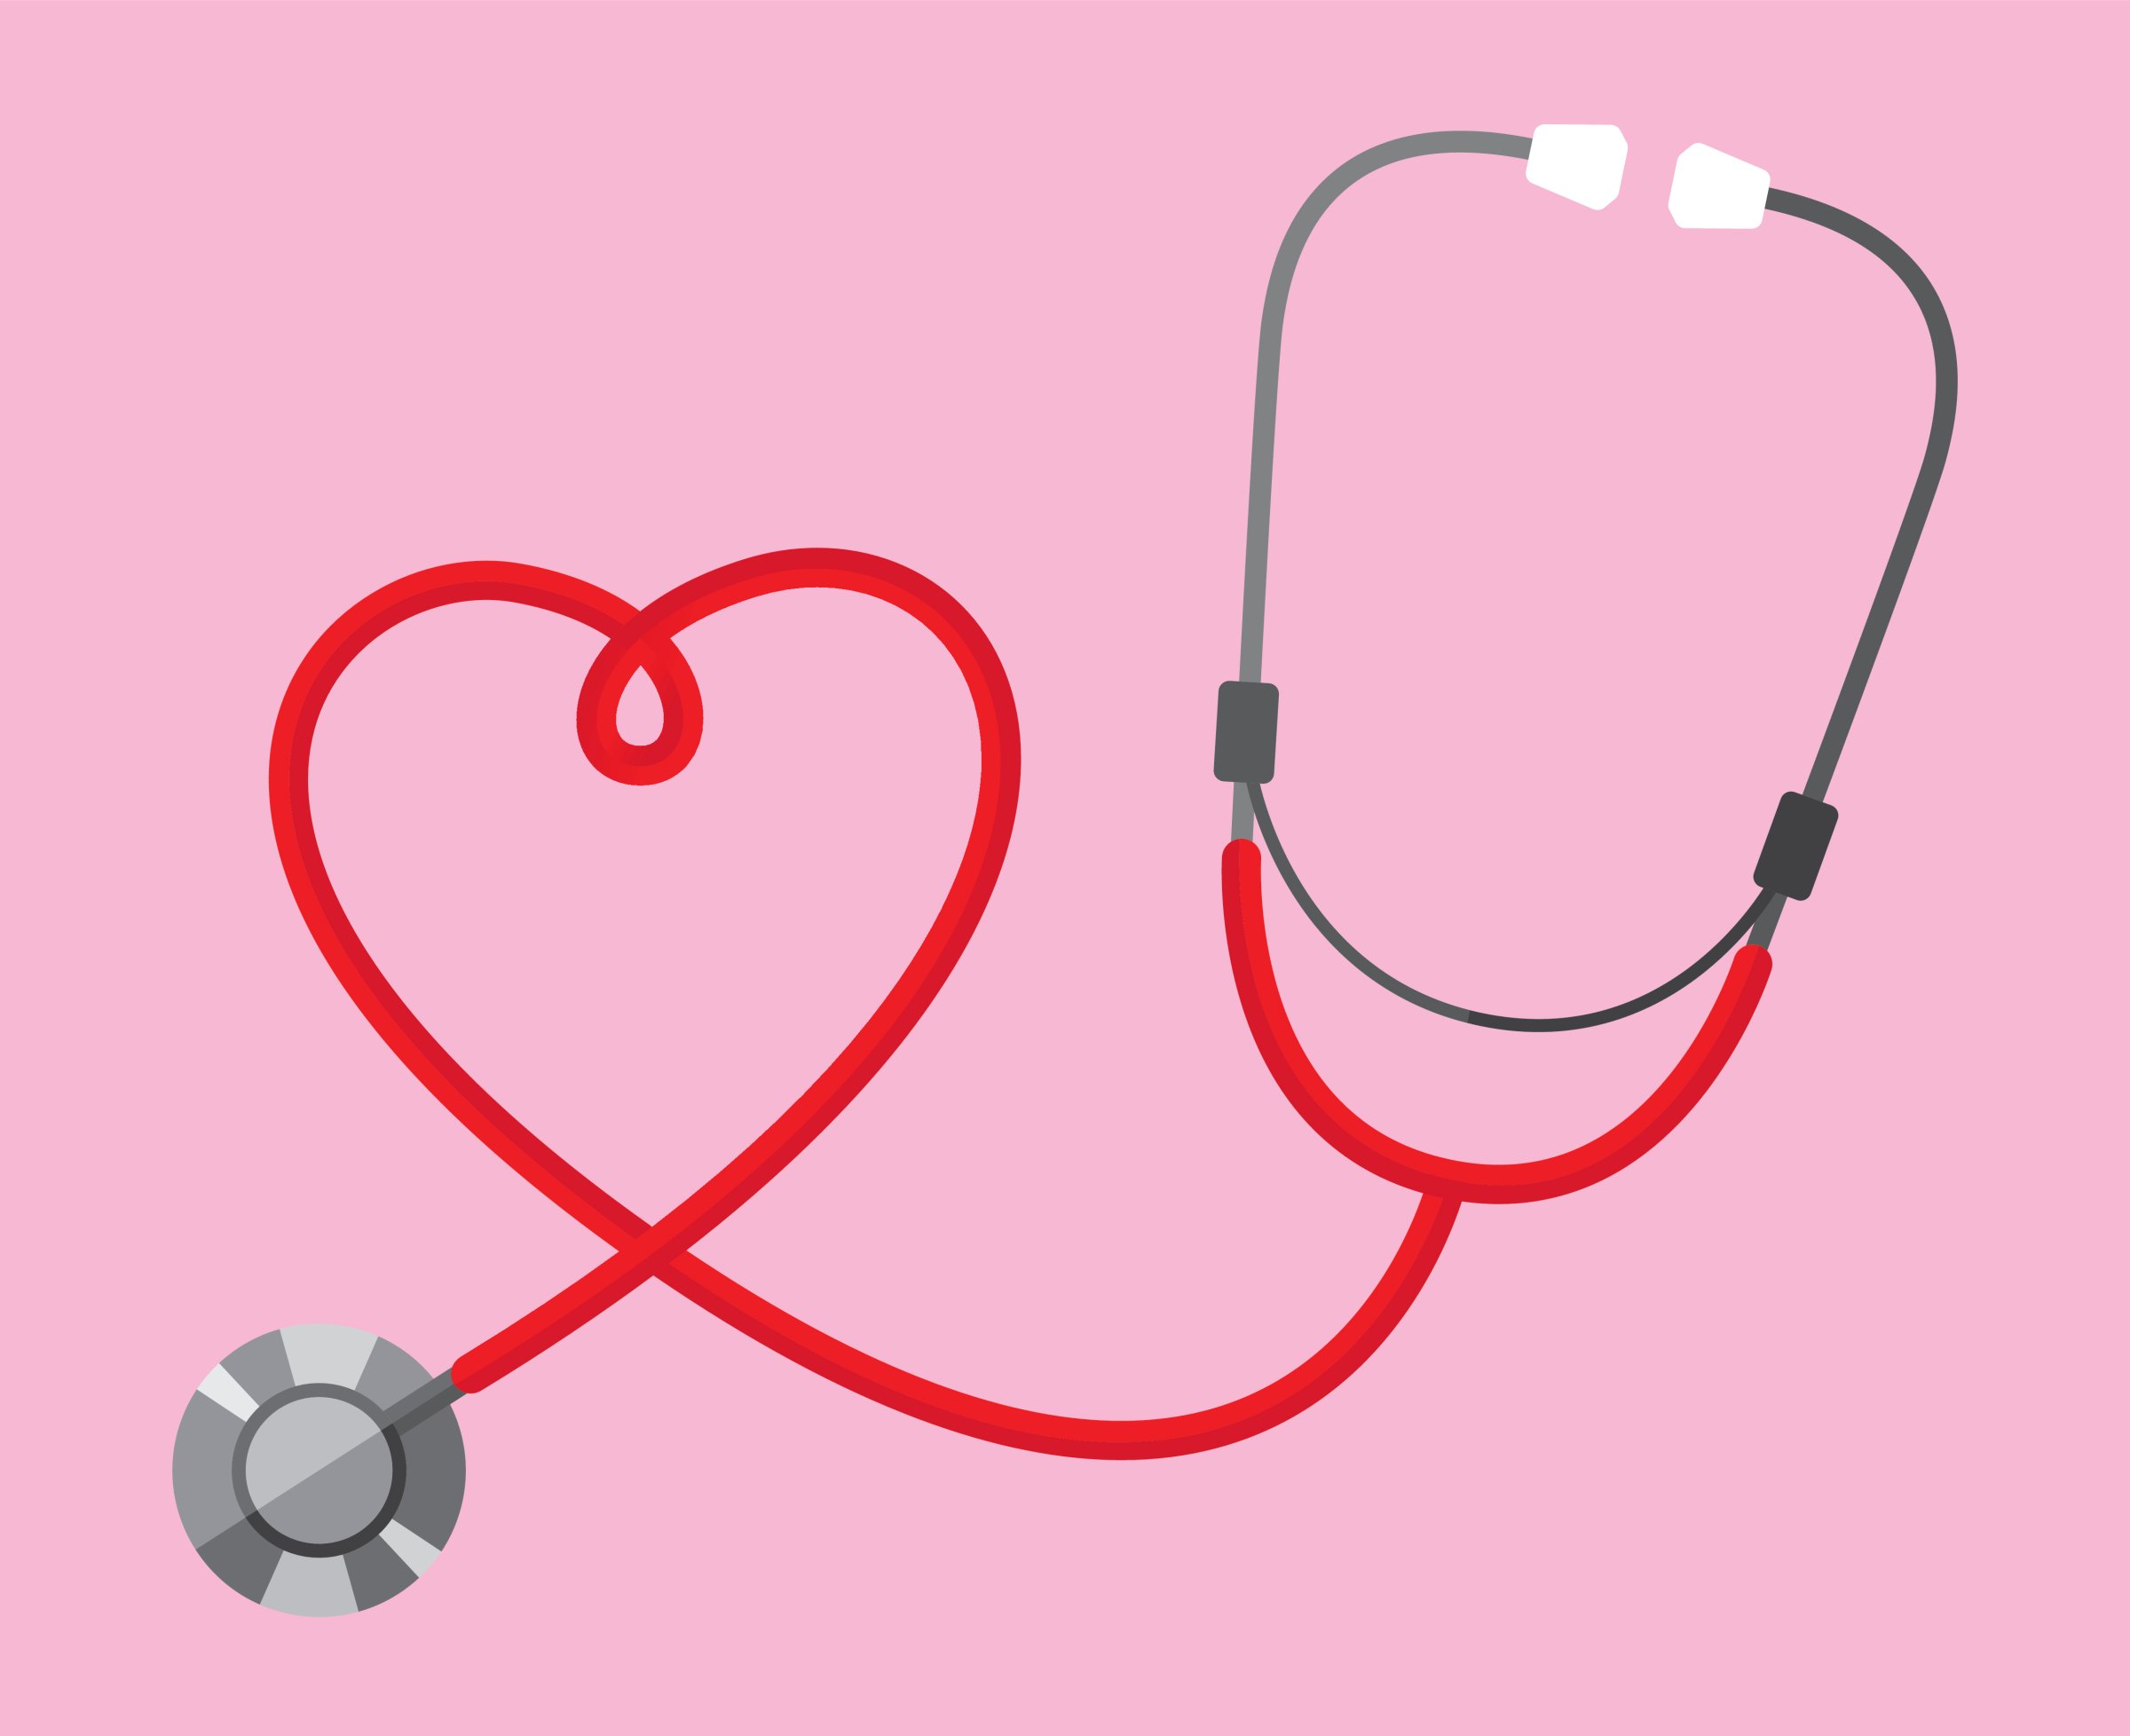 Vector illustration of a stethoscope twisted into the shape of a heart on a pink background.